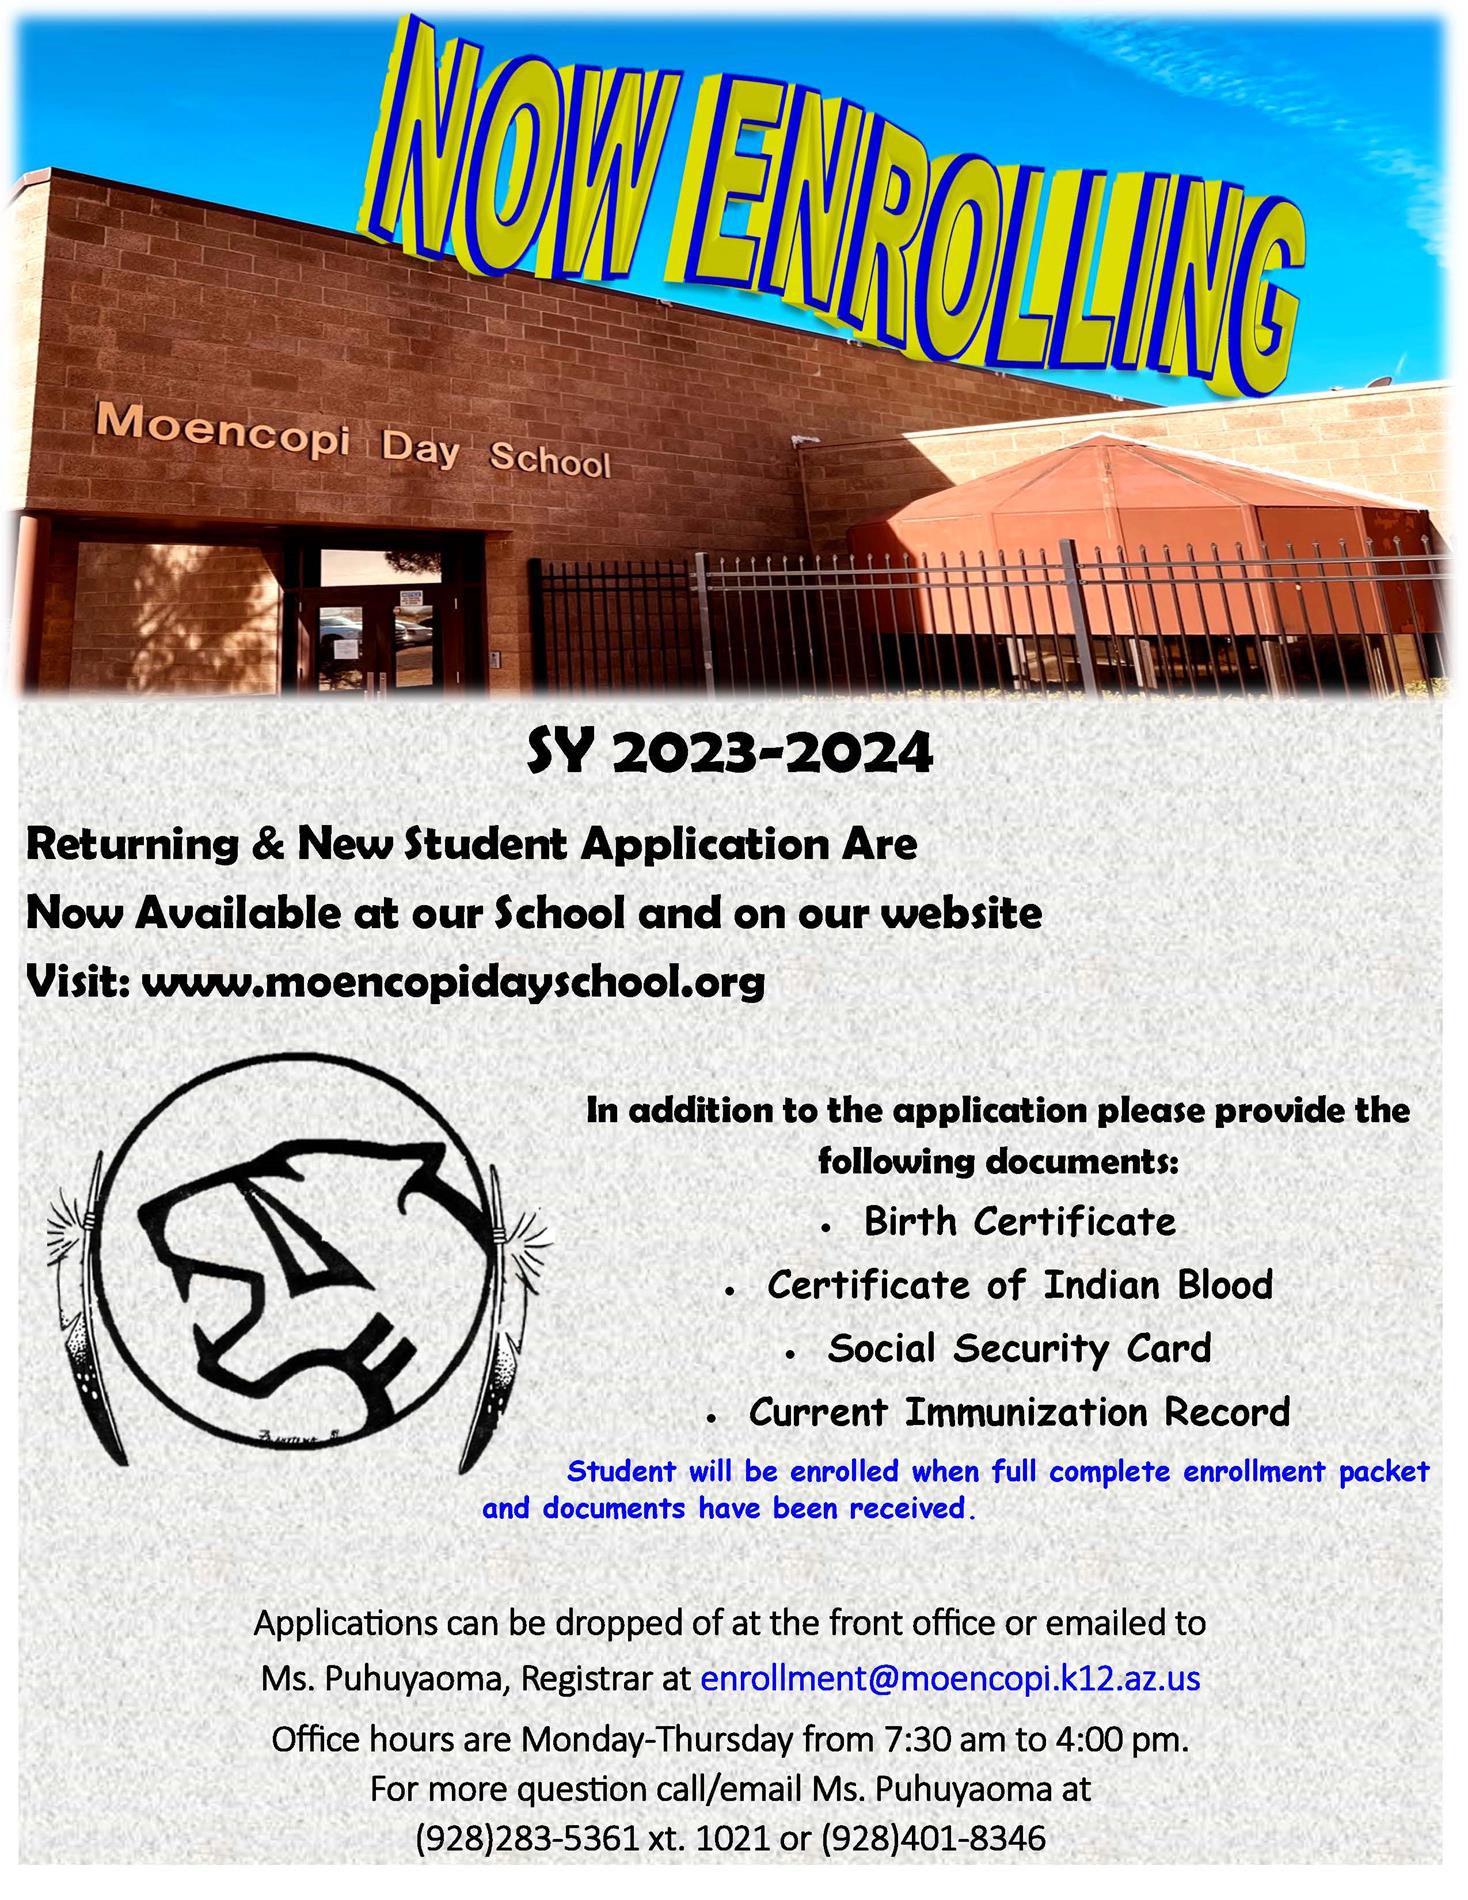 SY 2023-2024 Returning & New Student Application Are Now Available at our School and on our website Visit: www.moencopidayschool.org In addition to the application please provide the following documents: • Birth Certificate • Certificate of Indian Blood • Social Security Card • Current Immunization Record Student will be enrolled when full complete enrollment packet and documents have been received. Applications can be dropped of at the front office or emailed to Ms. Puhuyaoma, Registrar at enrollment@moencopi.k12.az.us Office hours are Monday-Thursday from 7:30 am to 4:00 pm. For more question call/email Ms. Puhuyaoma at (928)283-5361 xt. 1021 or (928)401-8346